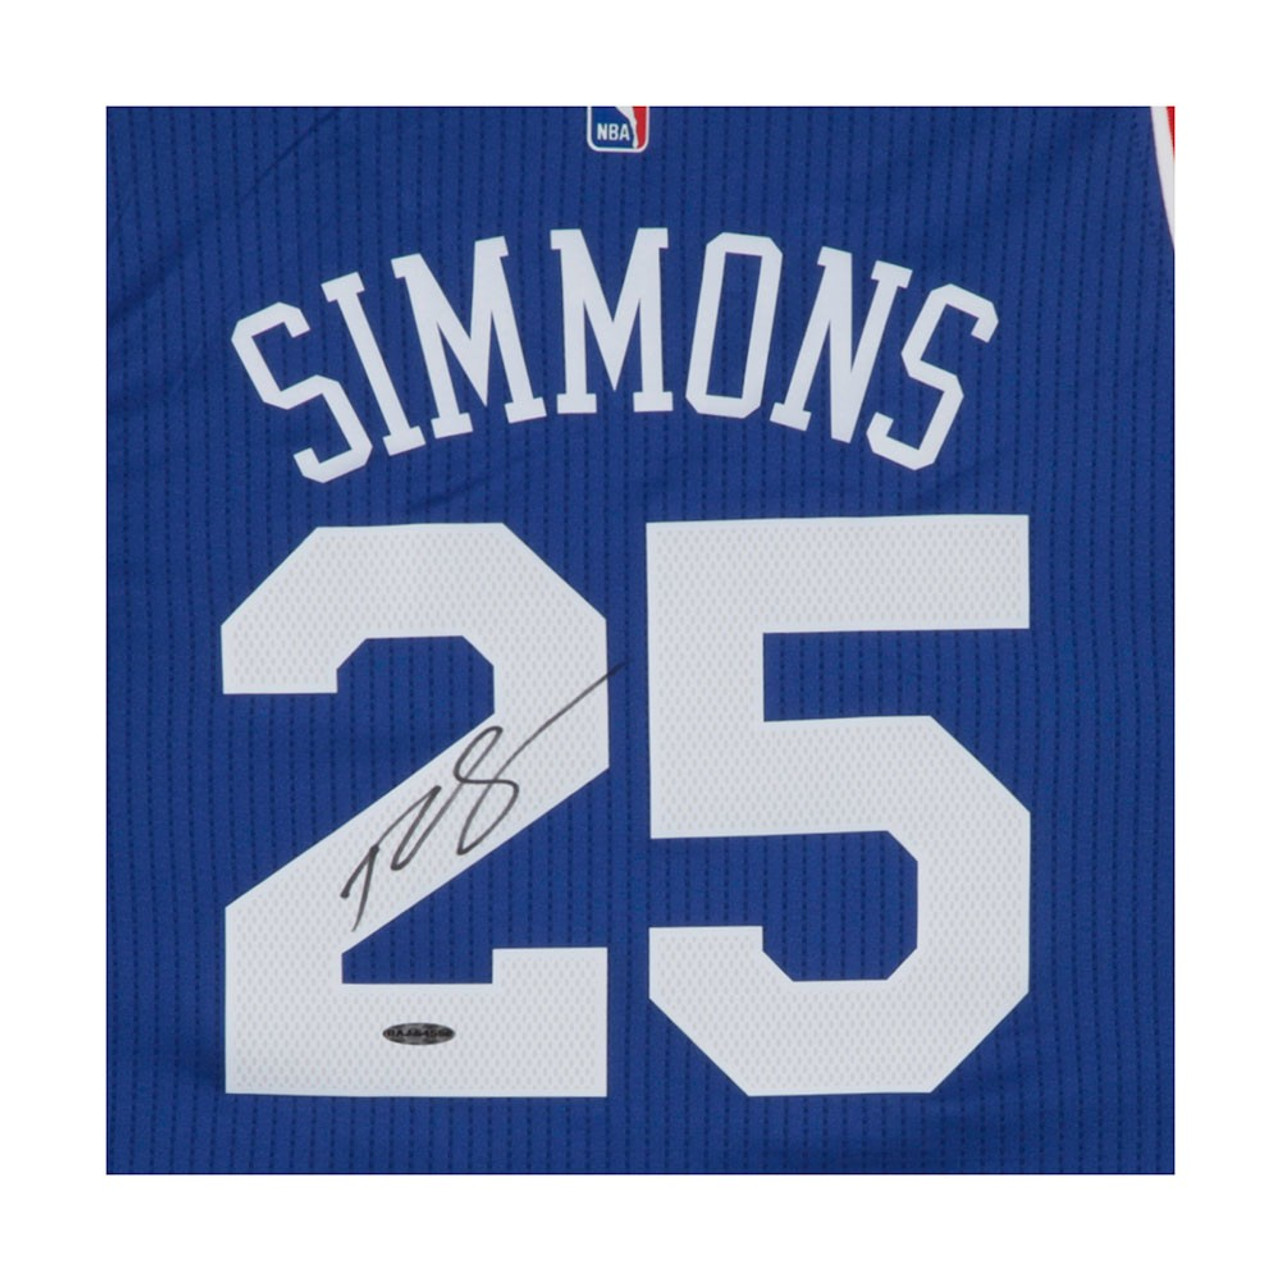 BEN SIMMONS Autographed & Inscribed 76ers Home Jersey UDA - Game Day Legends